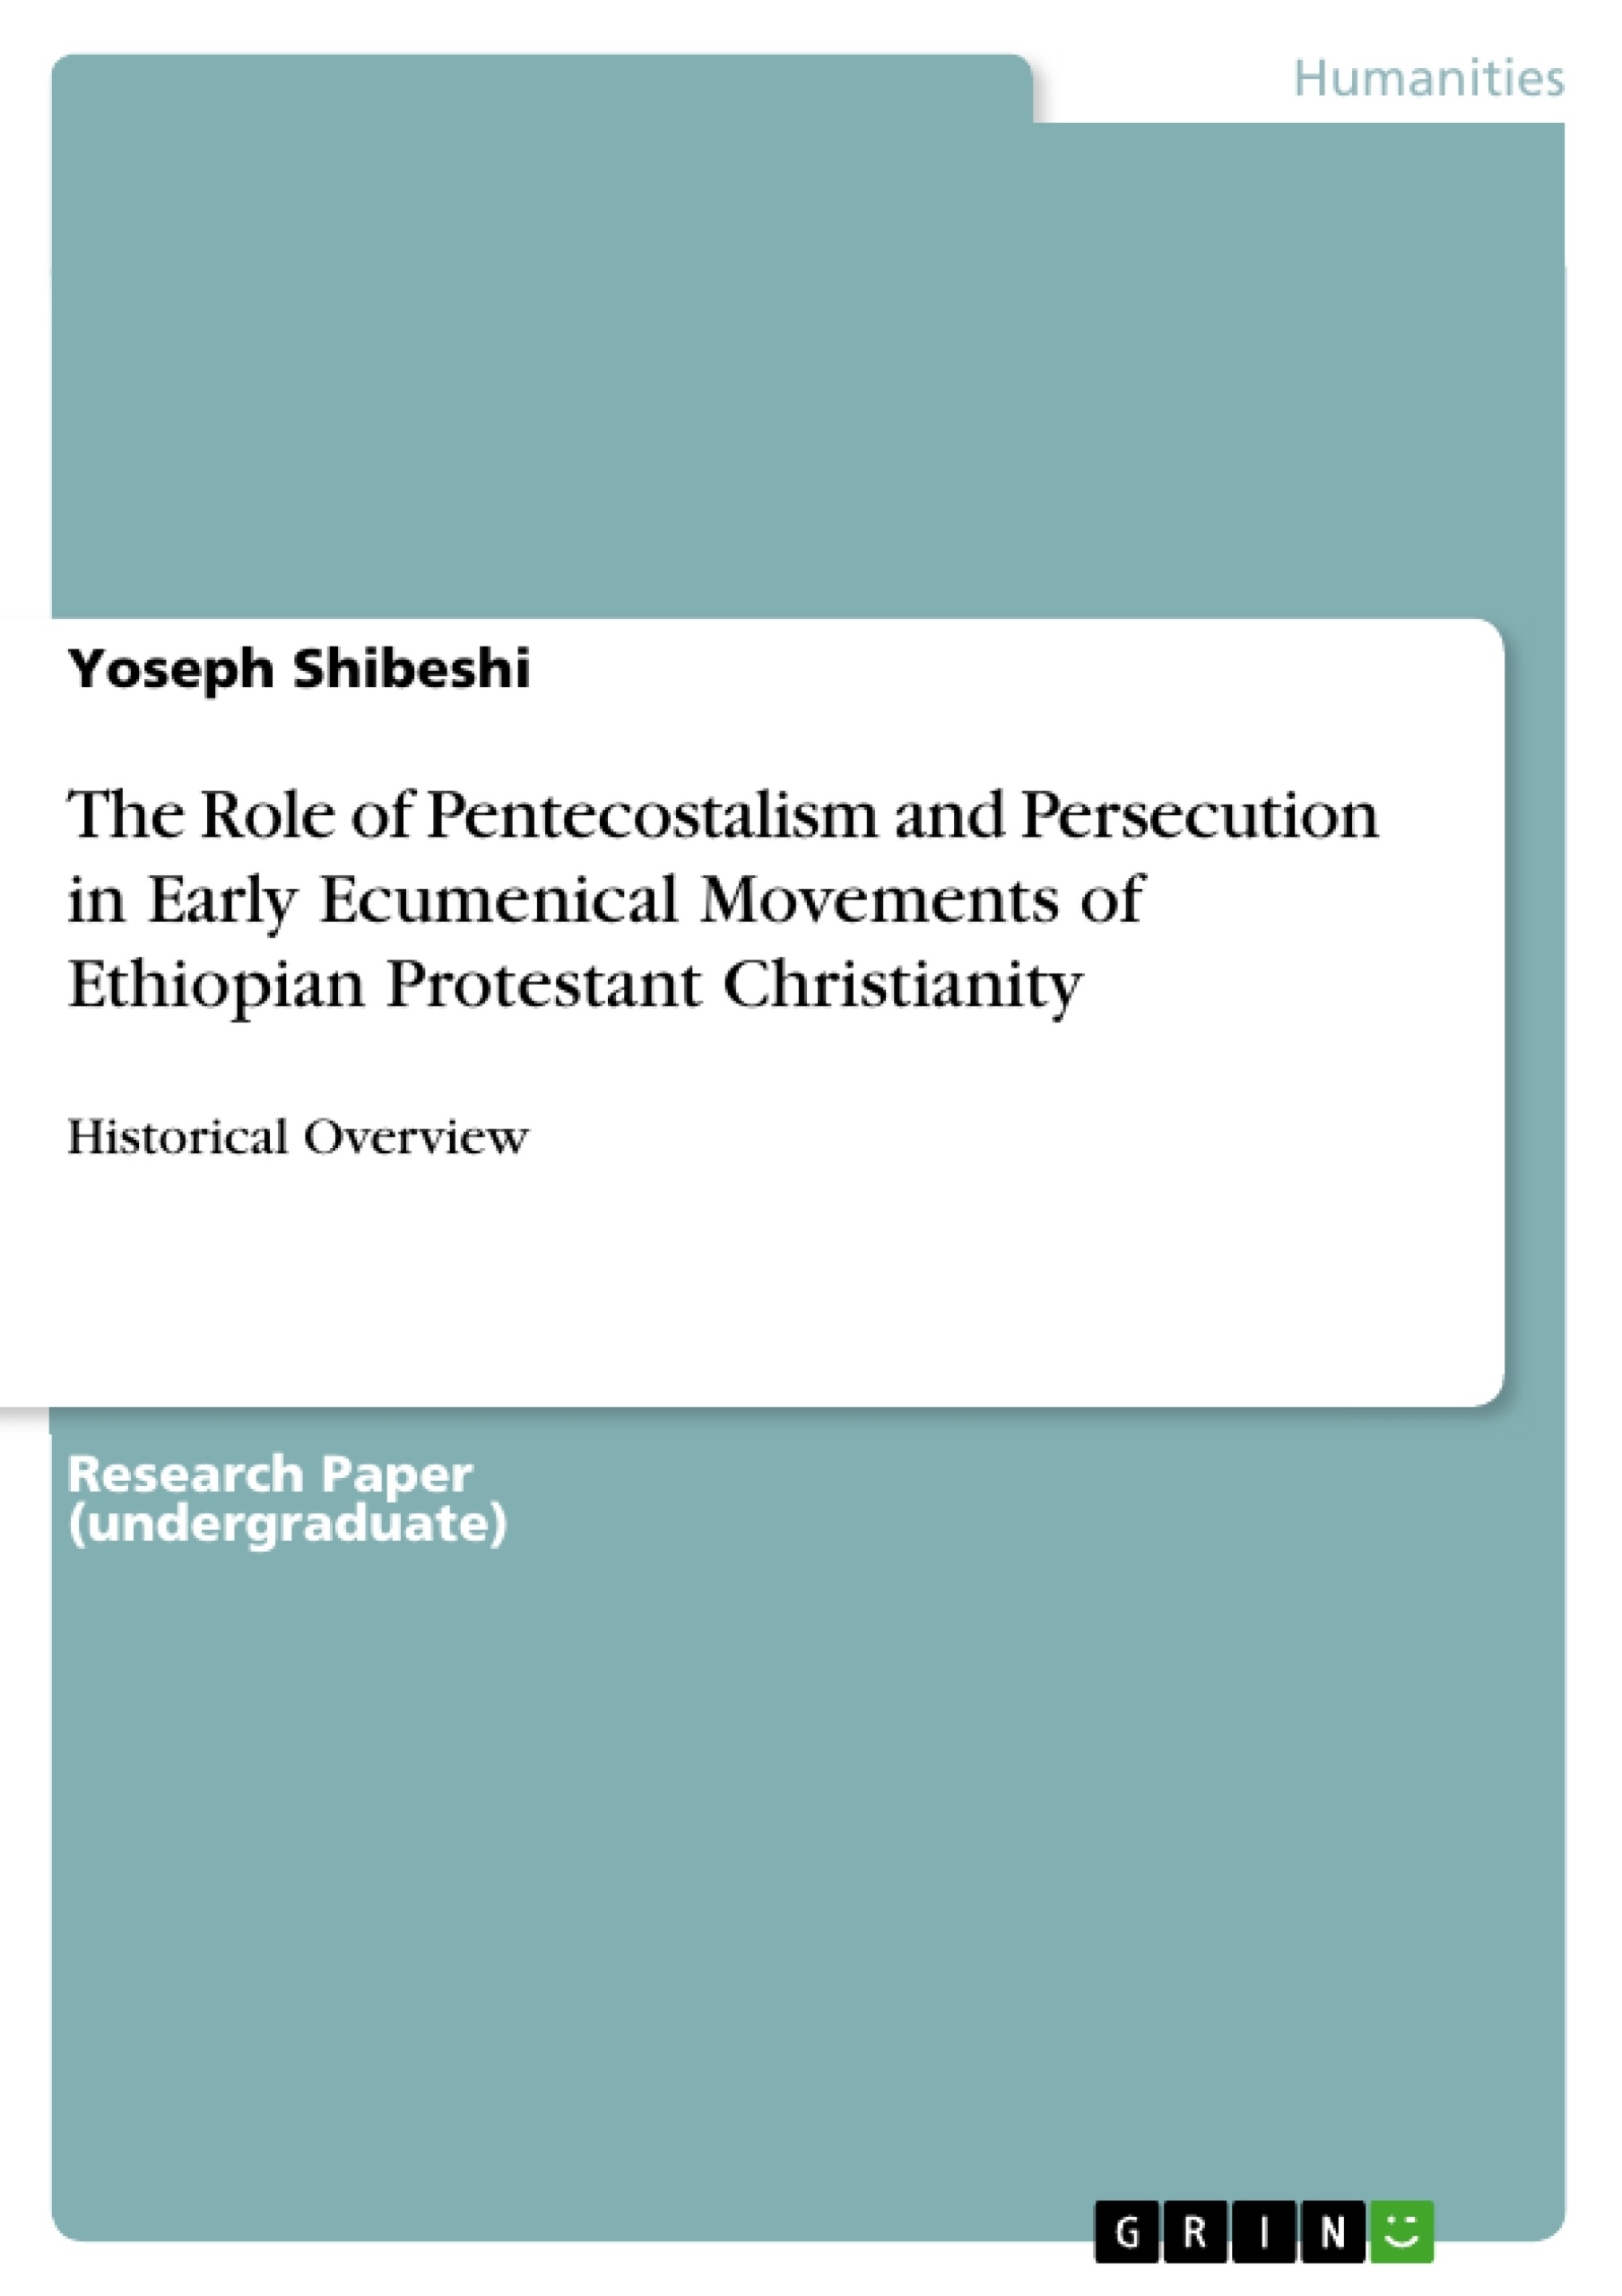 Title: The Role of Pentecostalism and Persecution in Early Ecumenical Movements of Ethiopian Protestant Christianity